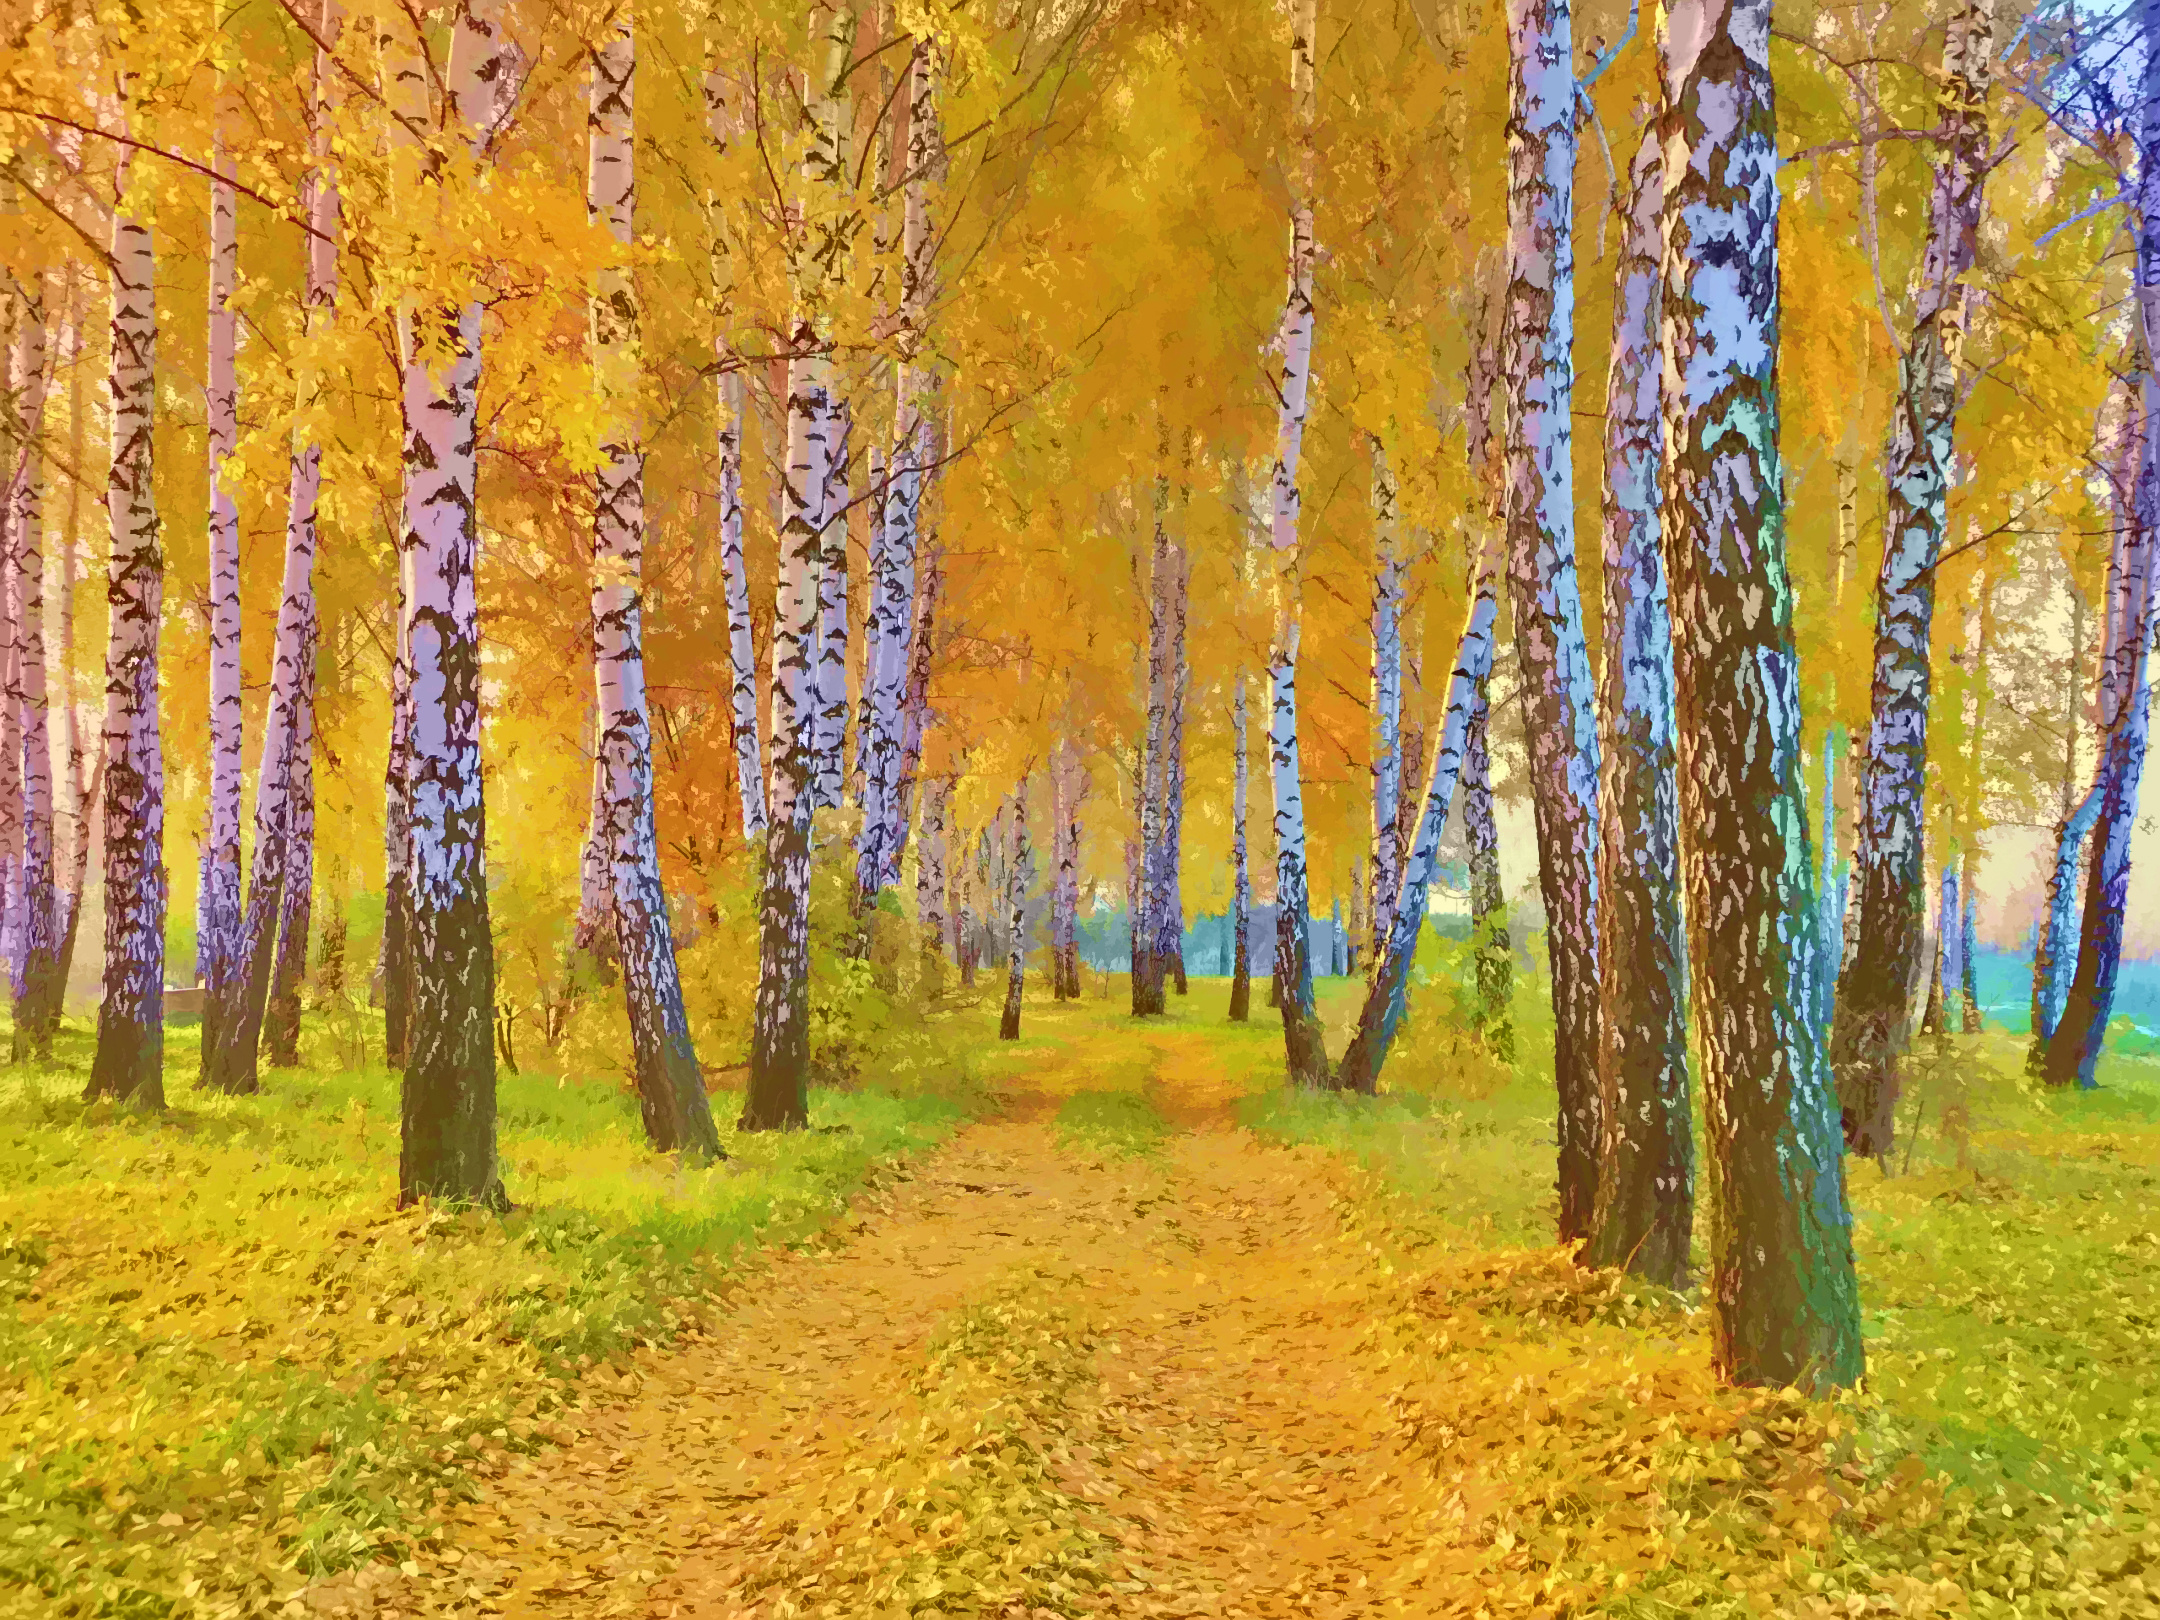 drawing, Nature, Landscape, Autumn, Road, Yellow, Leaves, And, Birch Wallpaper